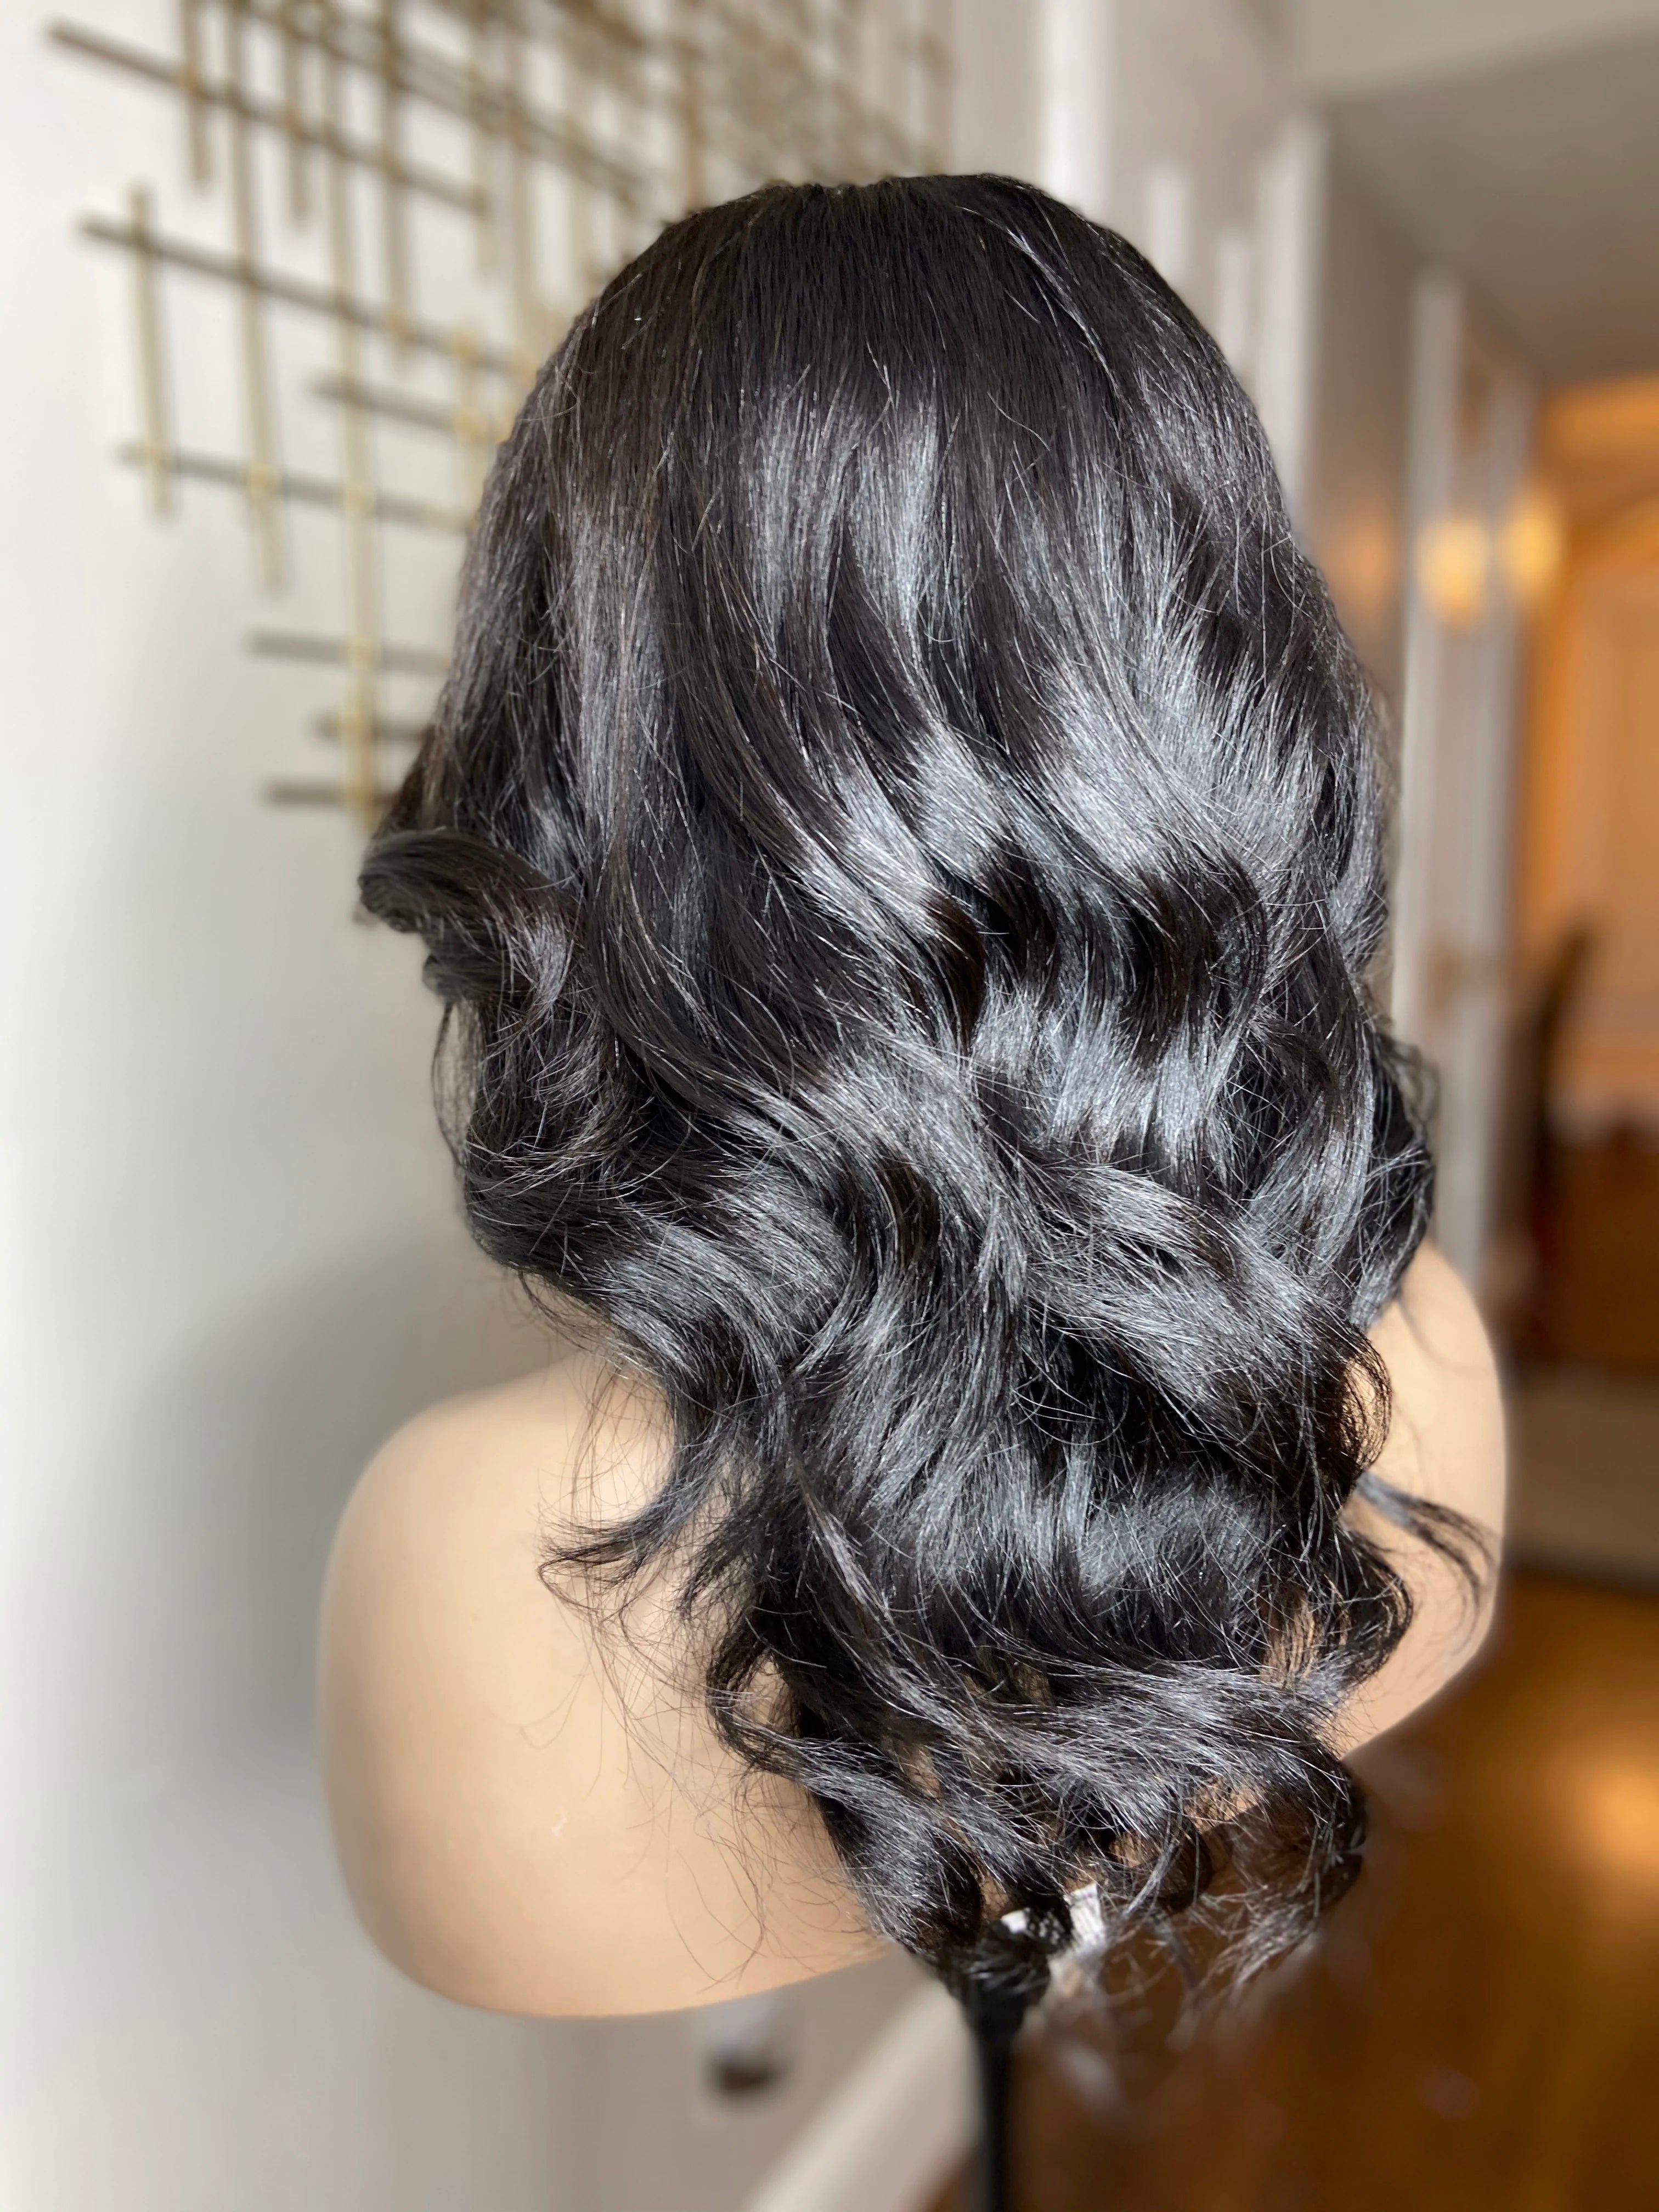 14 Deep Wave Hairstyles for the Ultimate Glam-Girl Appearance